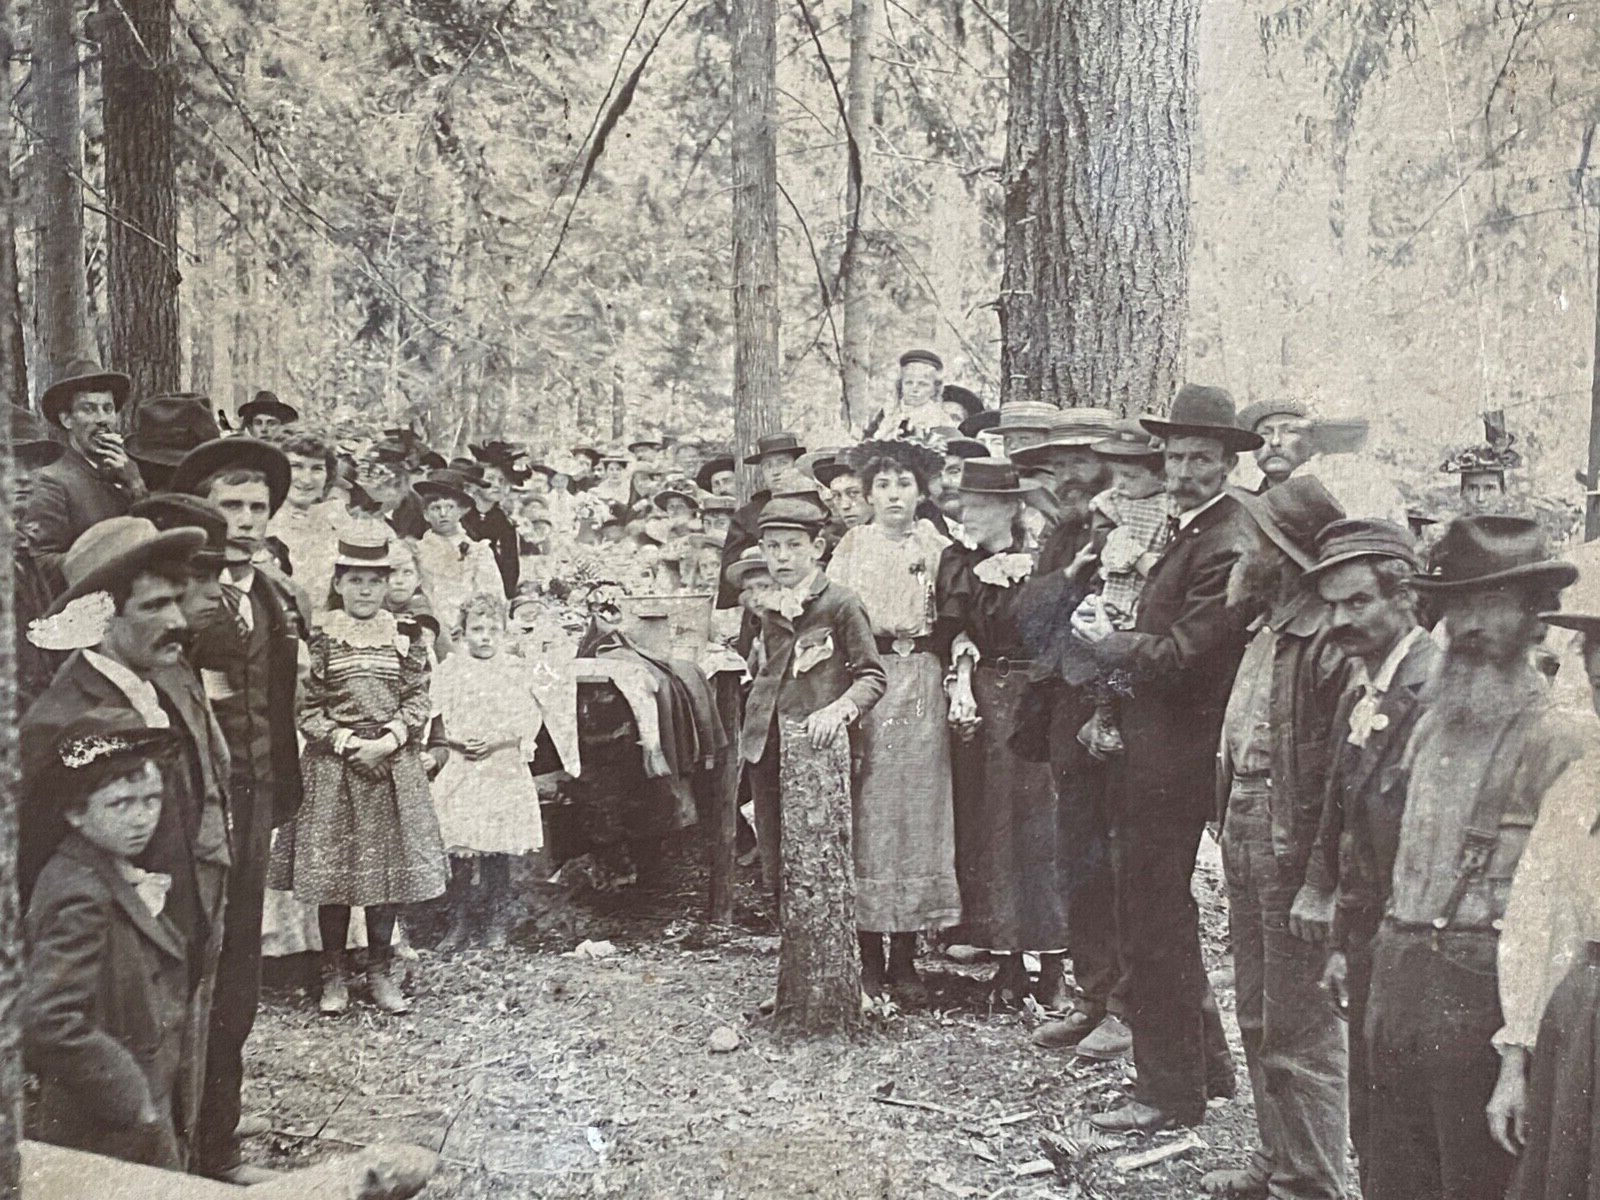 1890s FUNERAL OR PICNIC antique 10x12 mounted photo OREGON, PACIFIC NORTHWEST